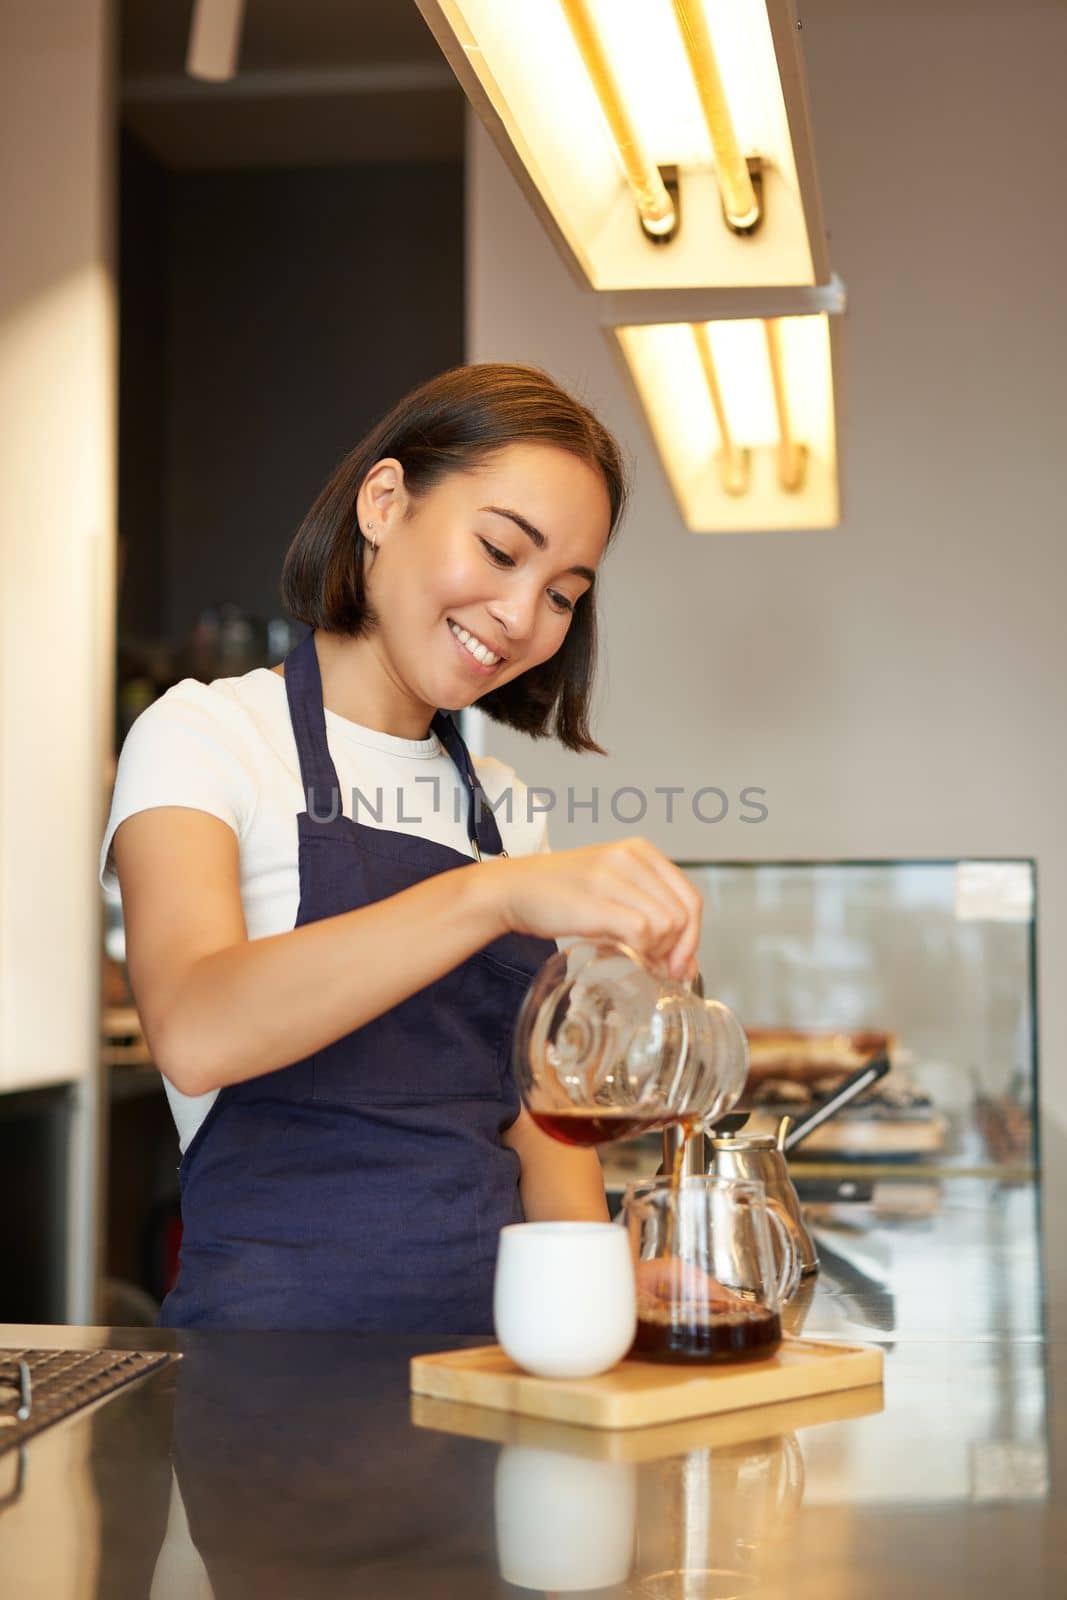 Vertical shot of smiling girl working as barista, prepare pour over, making filter coffee batch brew, standing at counter in cafe in apron.